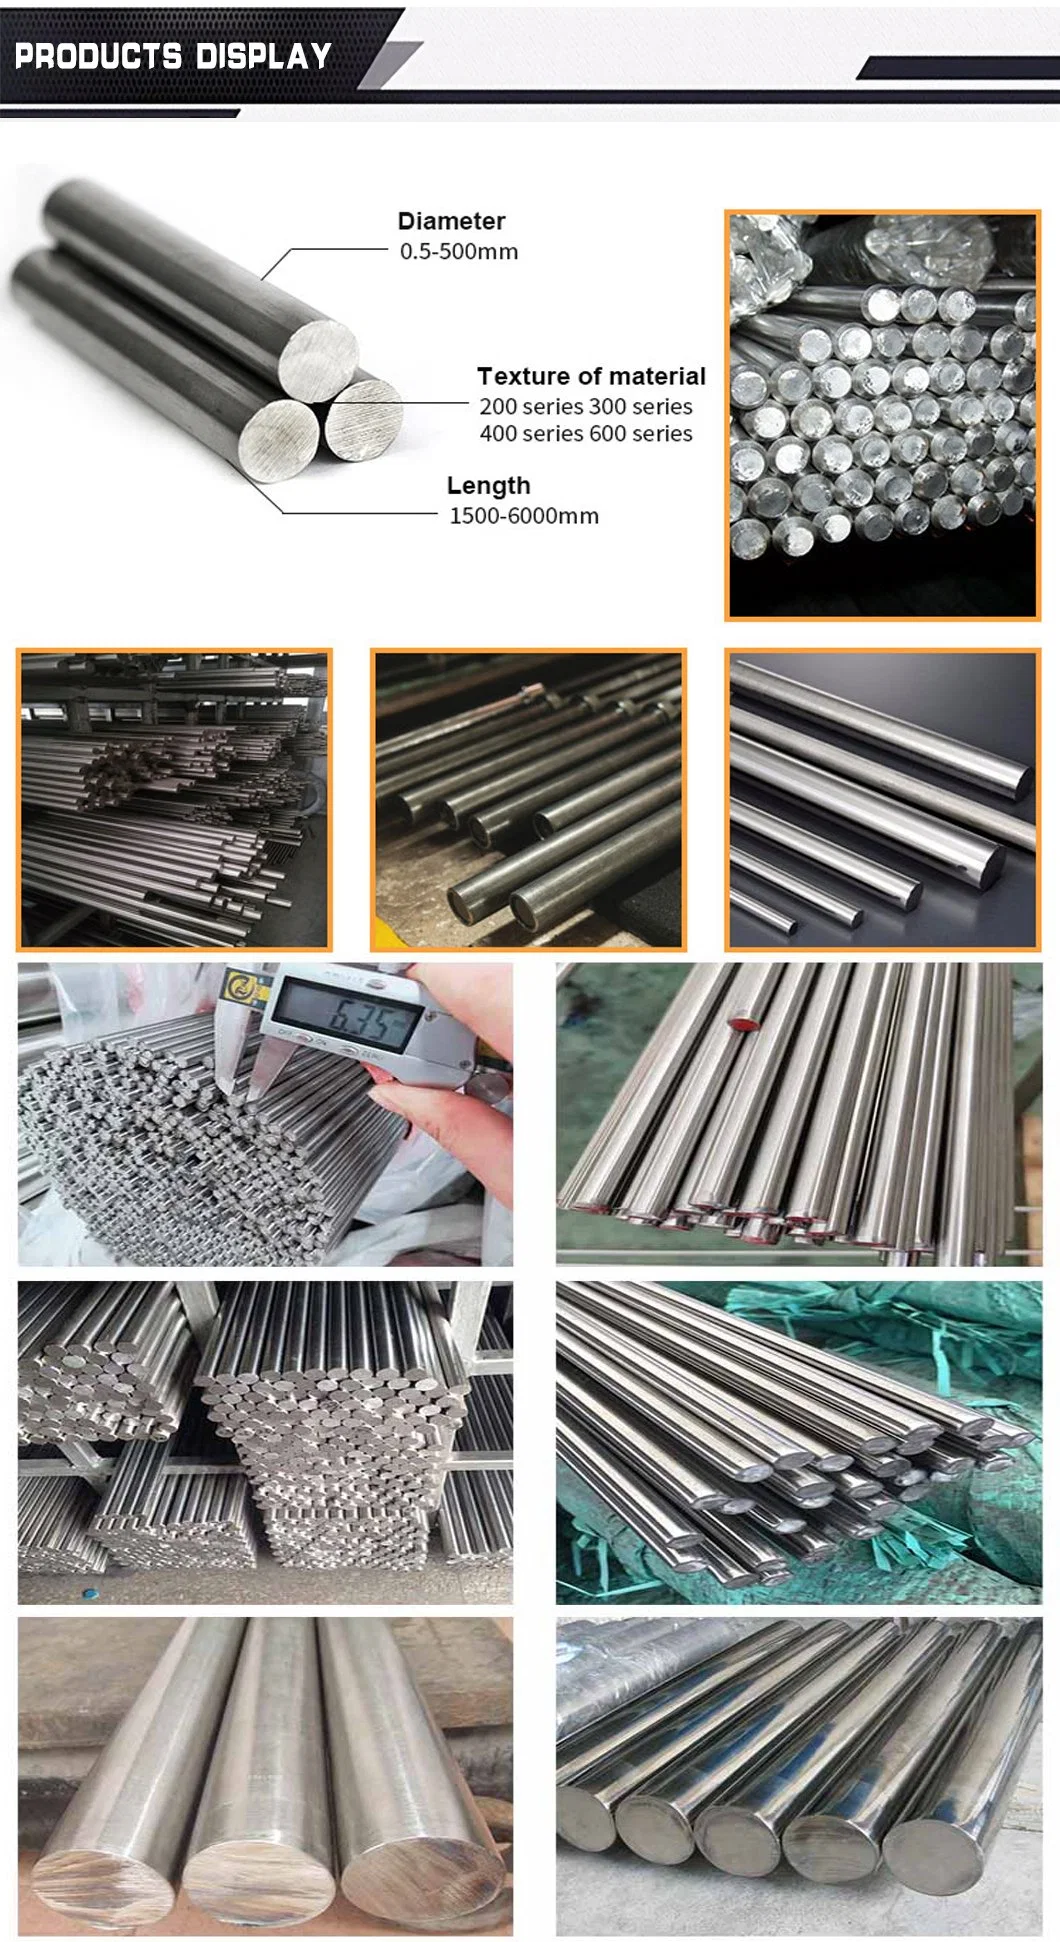 Hot Rolled Cold Rolled 6mm 8mm 12mm Super Duplex ASTM Ss 201 202 304 316 316L 2205 2507 2101 Stainless Steel Round Bar Rod